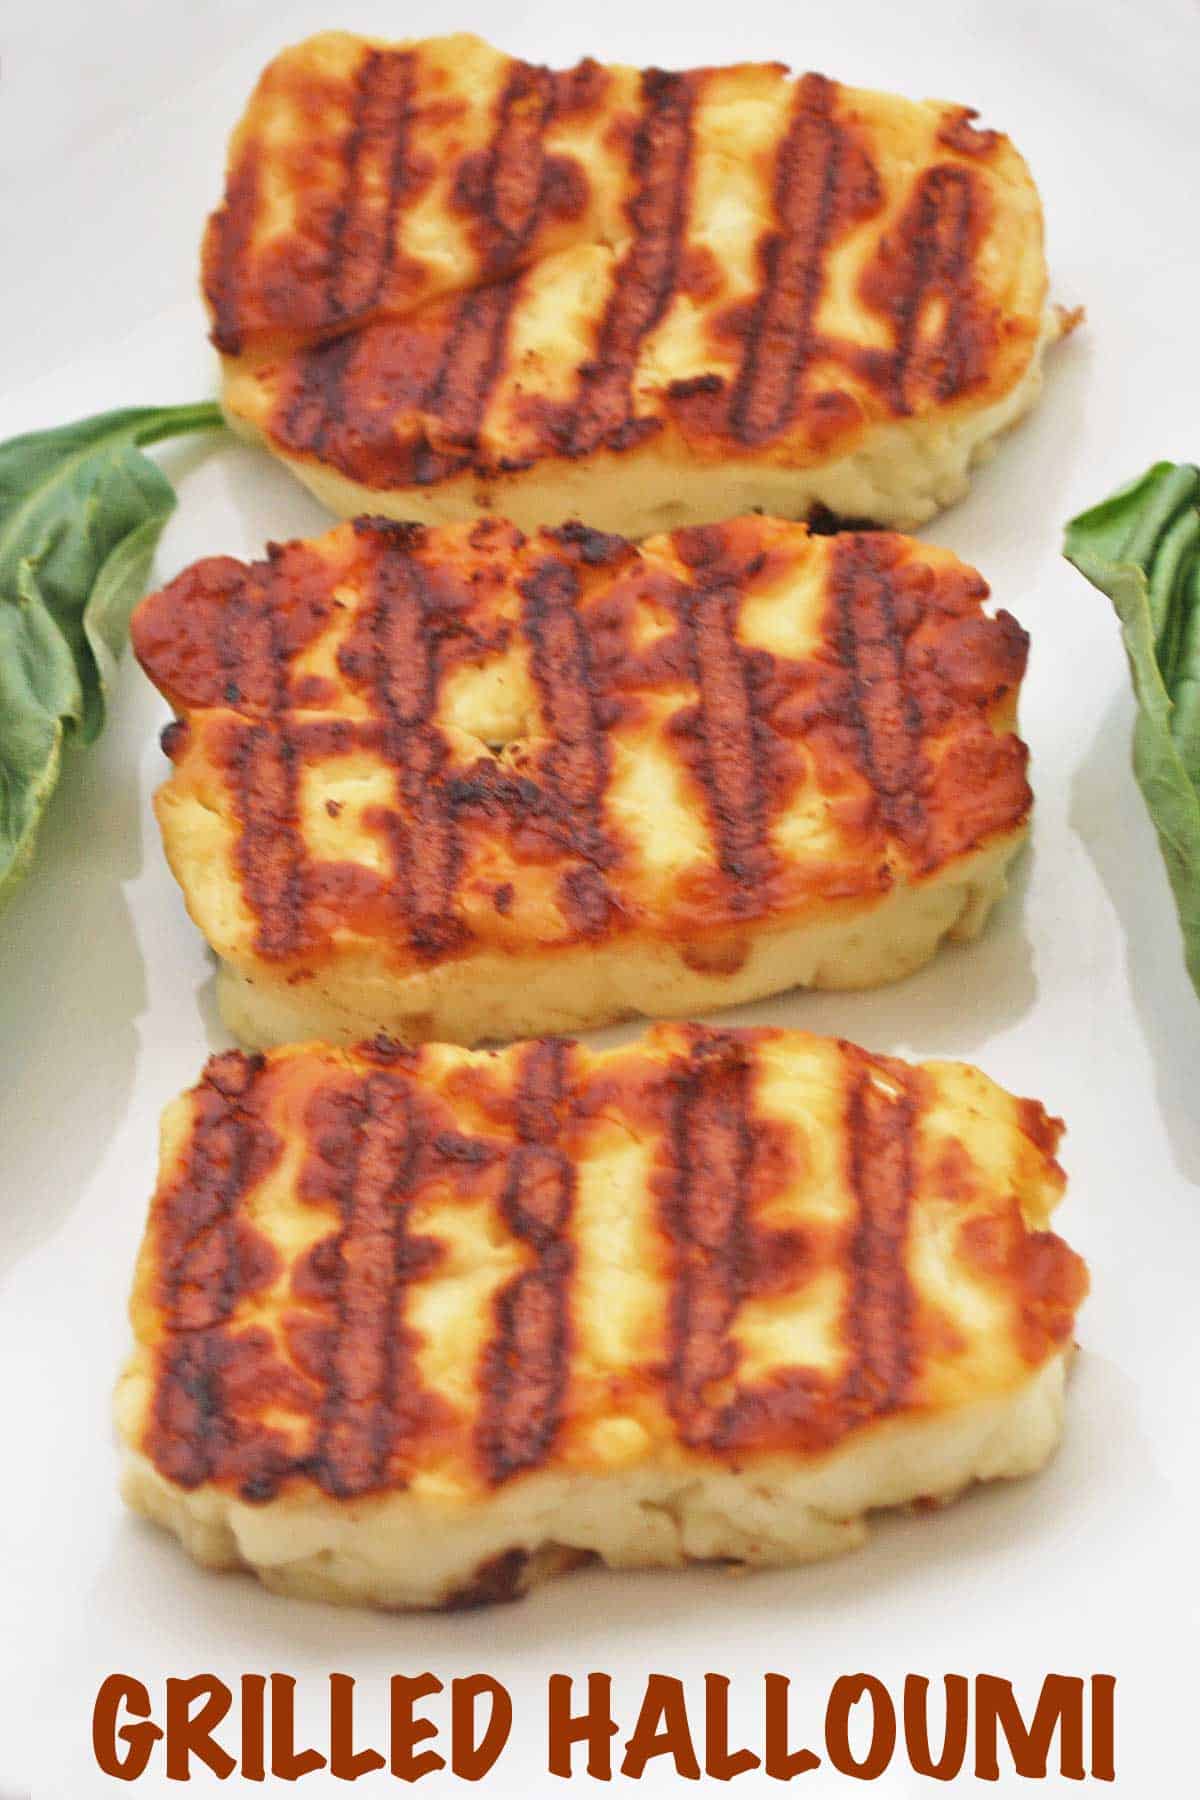 Grilled halloumi cheese slices on a plate.